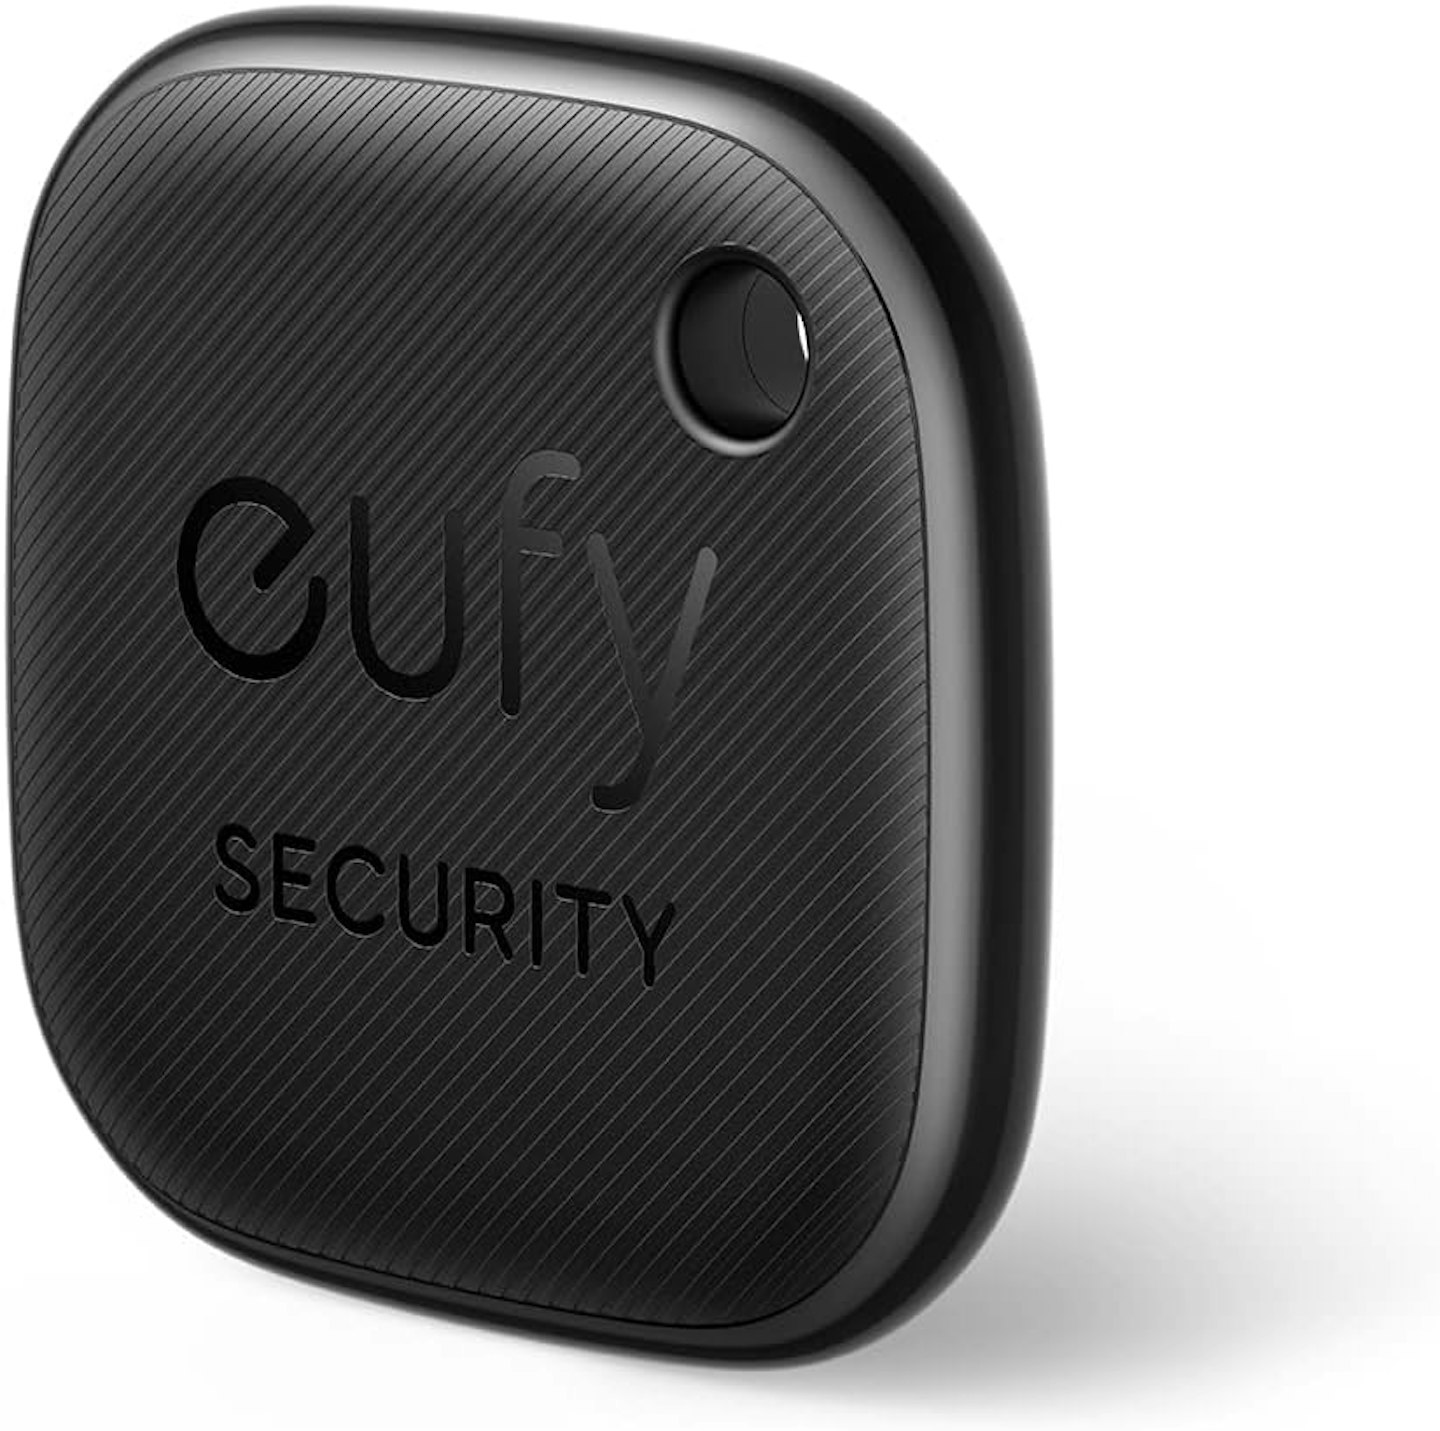 eufy - best luggage trackers